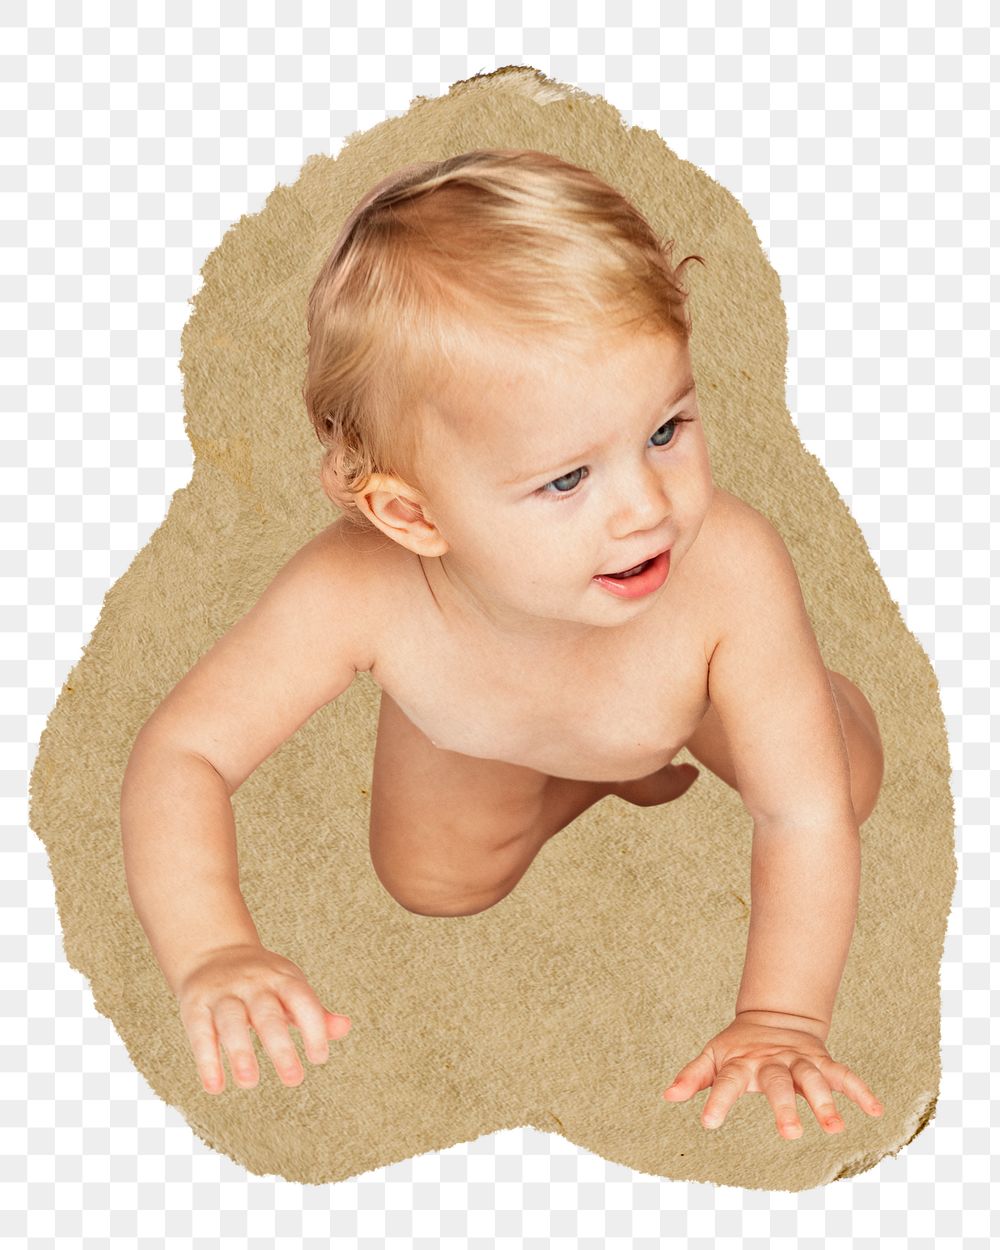 Baby crawling png sticker, ripped paper on transparent background 